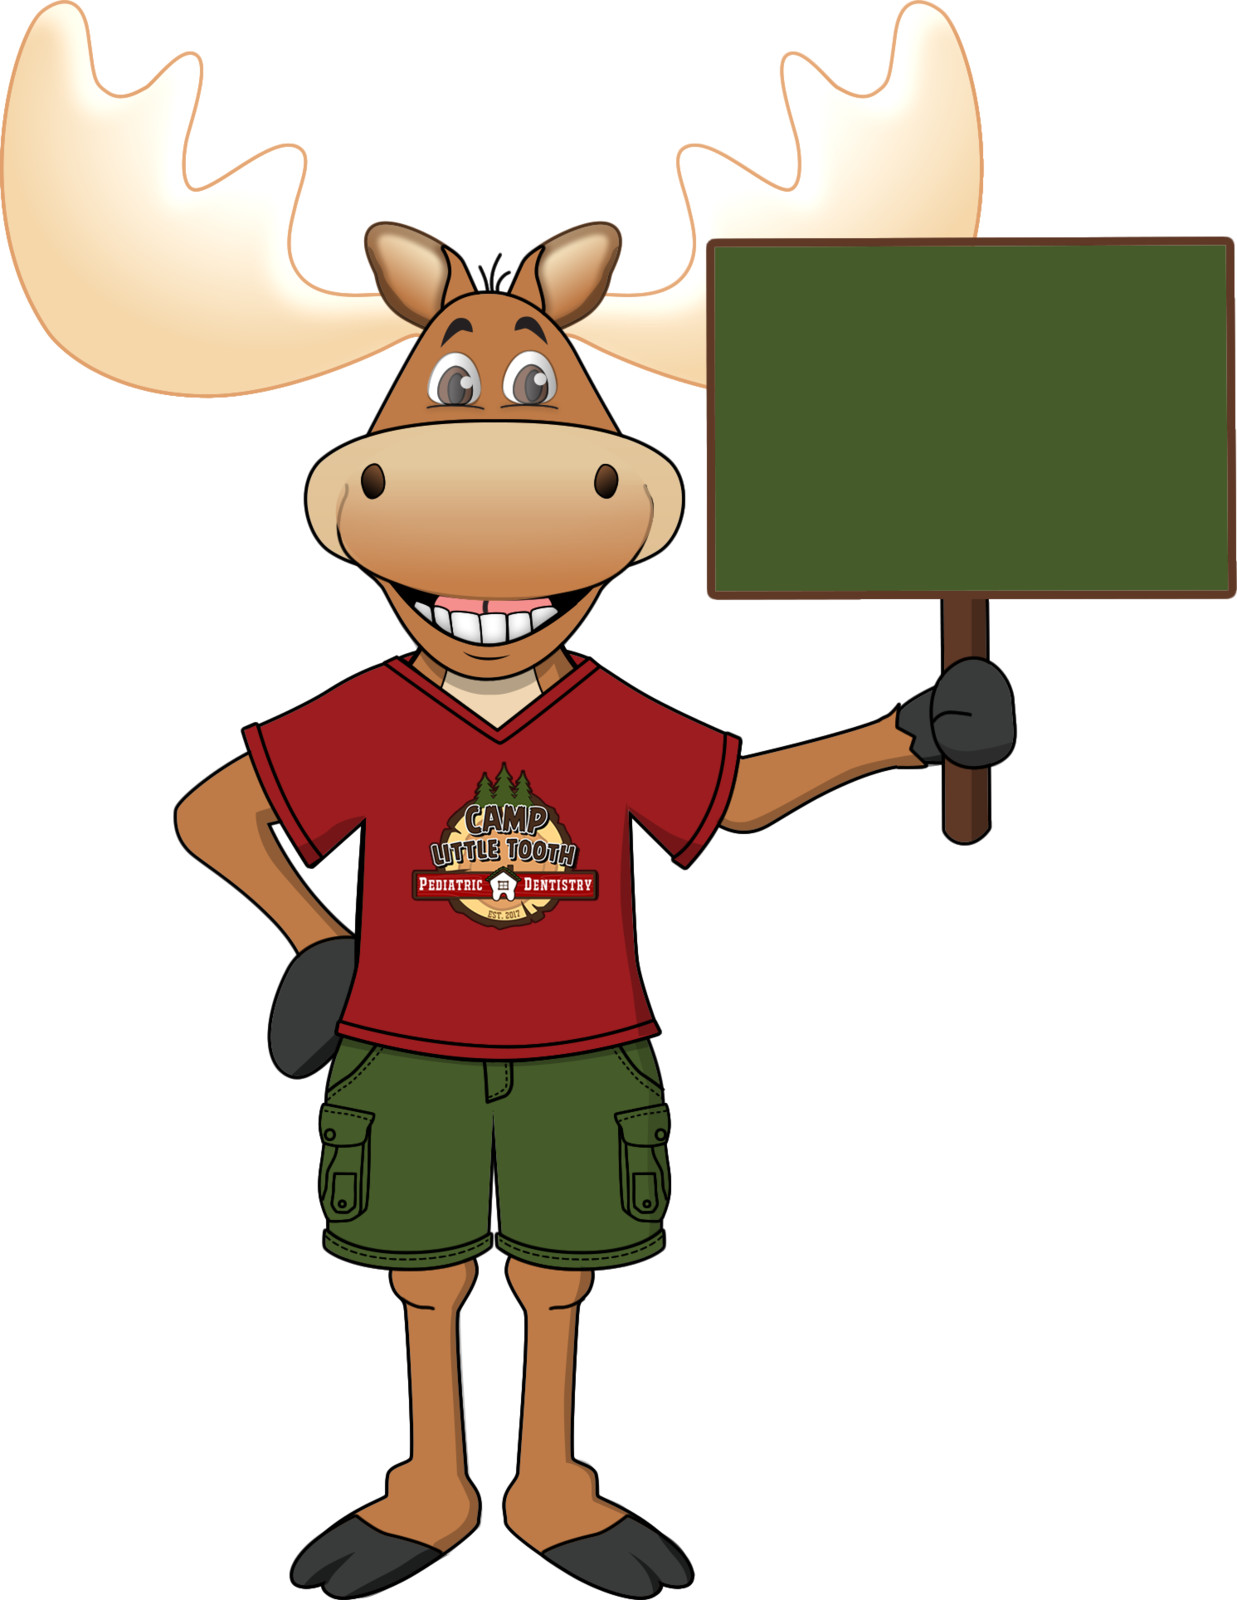 Max the Moose, Camp Little Tooth's mascot